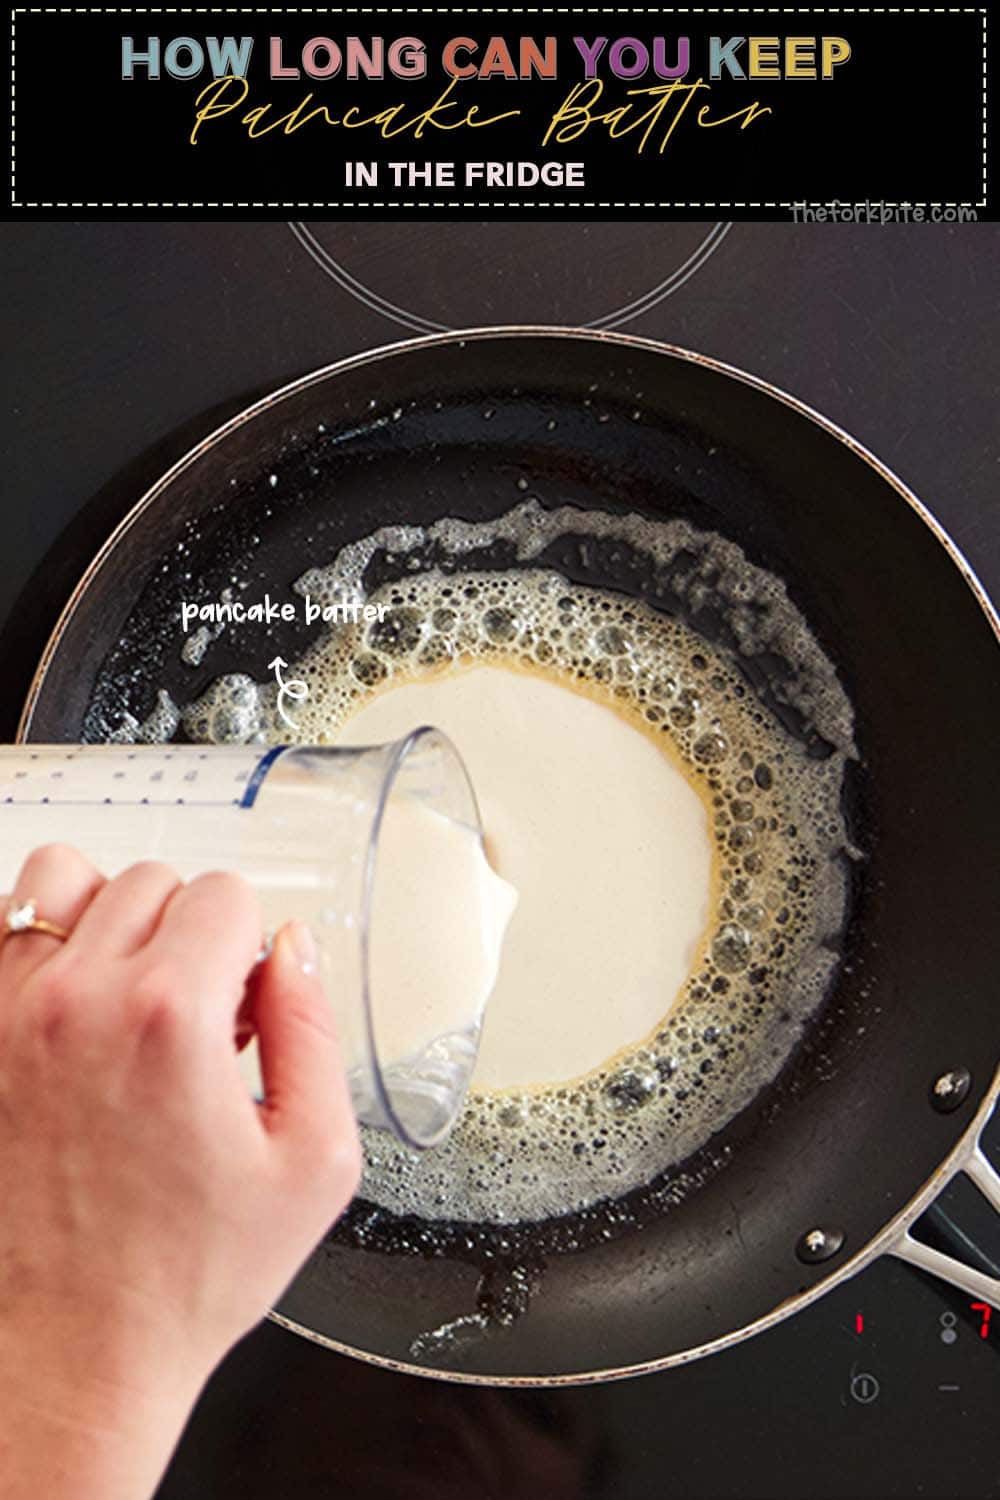 A regular pancake batter made using flour, milk, and eggs are okay when stored for between two and five days in the fridge. It does, however, depend on the expiry dates printed on the product packaging.